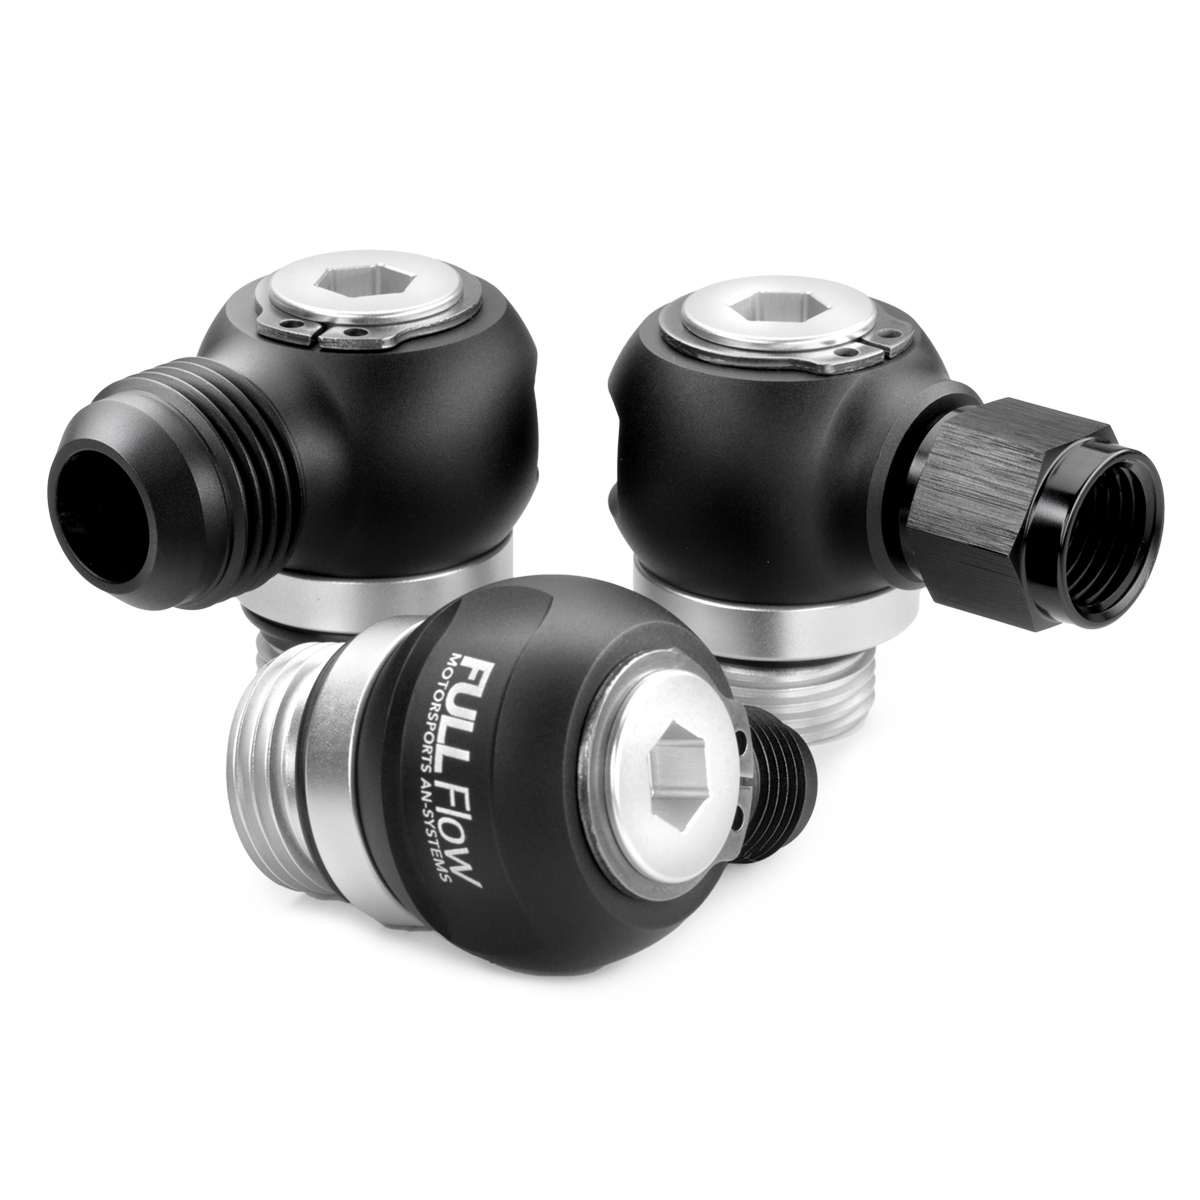 3/8 NPT Fittings for your fuel system - Nuke Performance